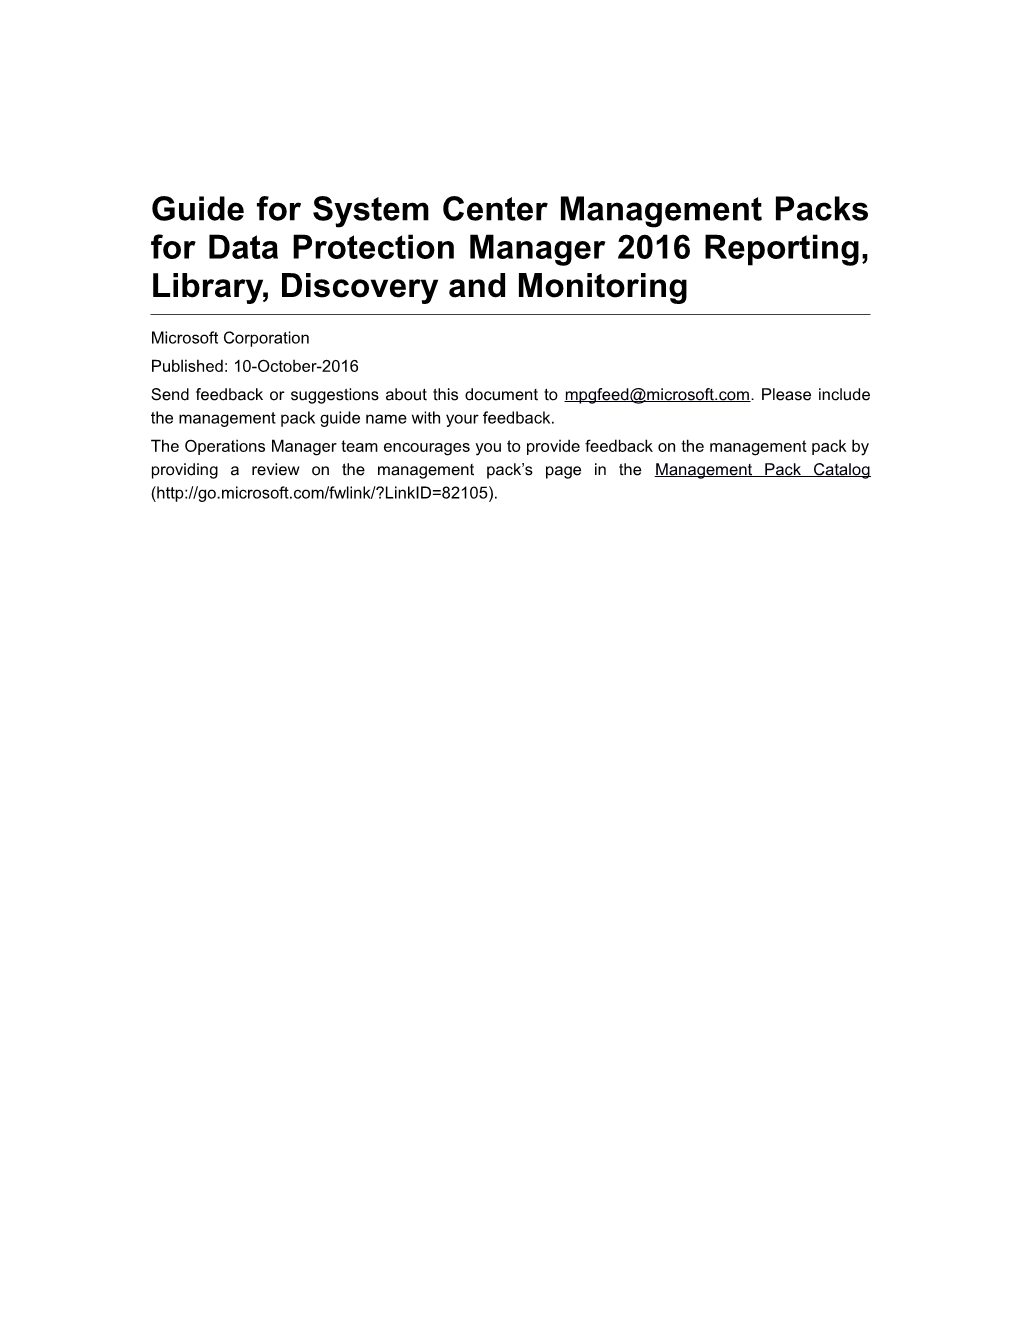 Guide for System Center Management Packs for Data Protection Manager 2016 Reporting, Library